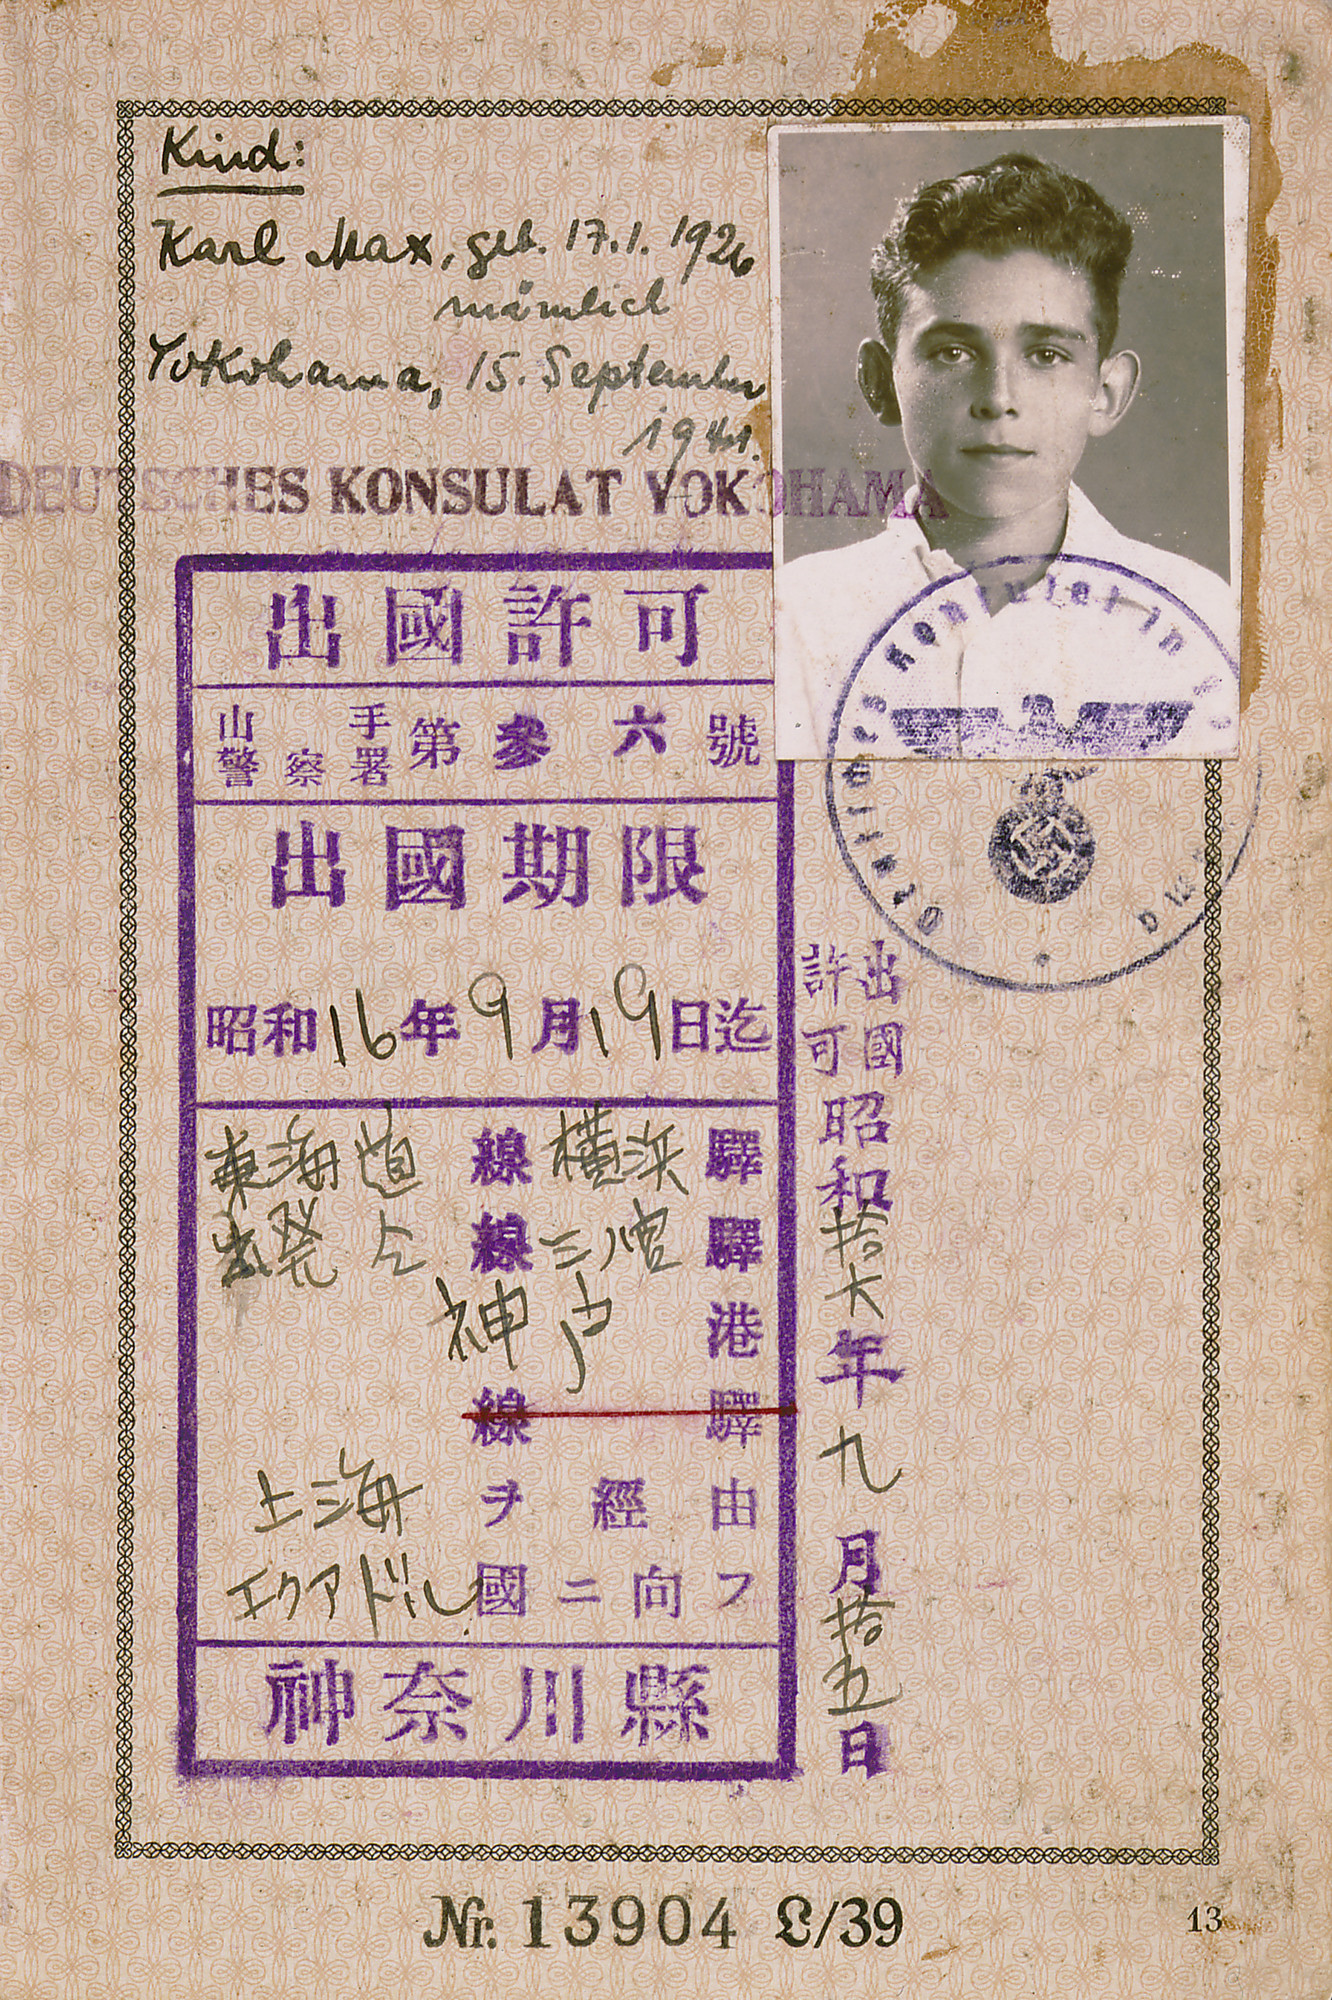 Photo of Karl Sondheimer on a page of hs father's German passport.

German Jews were commonly required to add "Israel" to their names if male, and "Sara" if female.  Jewish passports were further distinguished by a "J," signifying "Jude" (Jew), stamped in red on the first page.